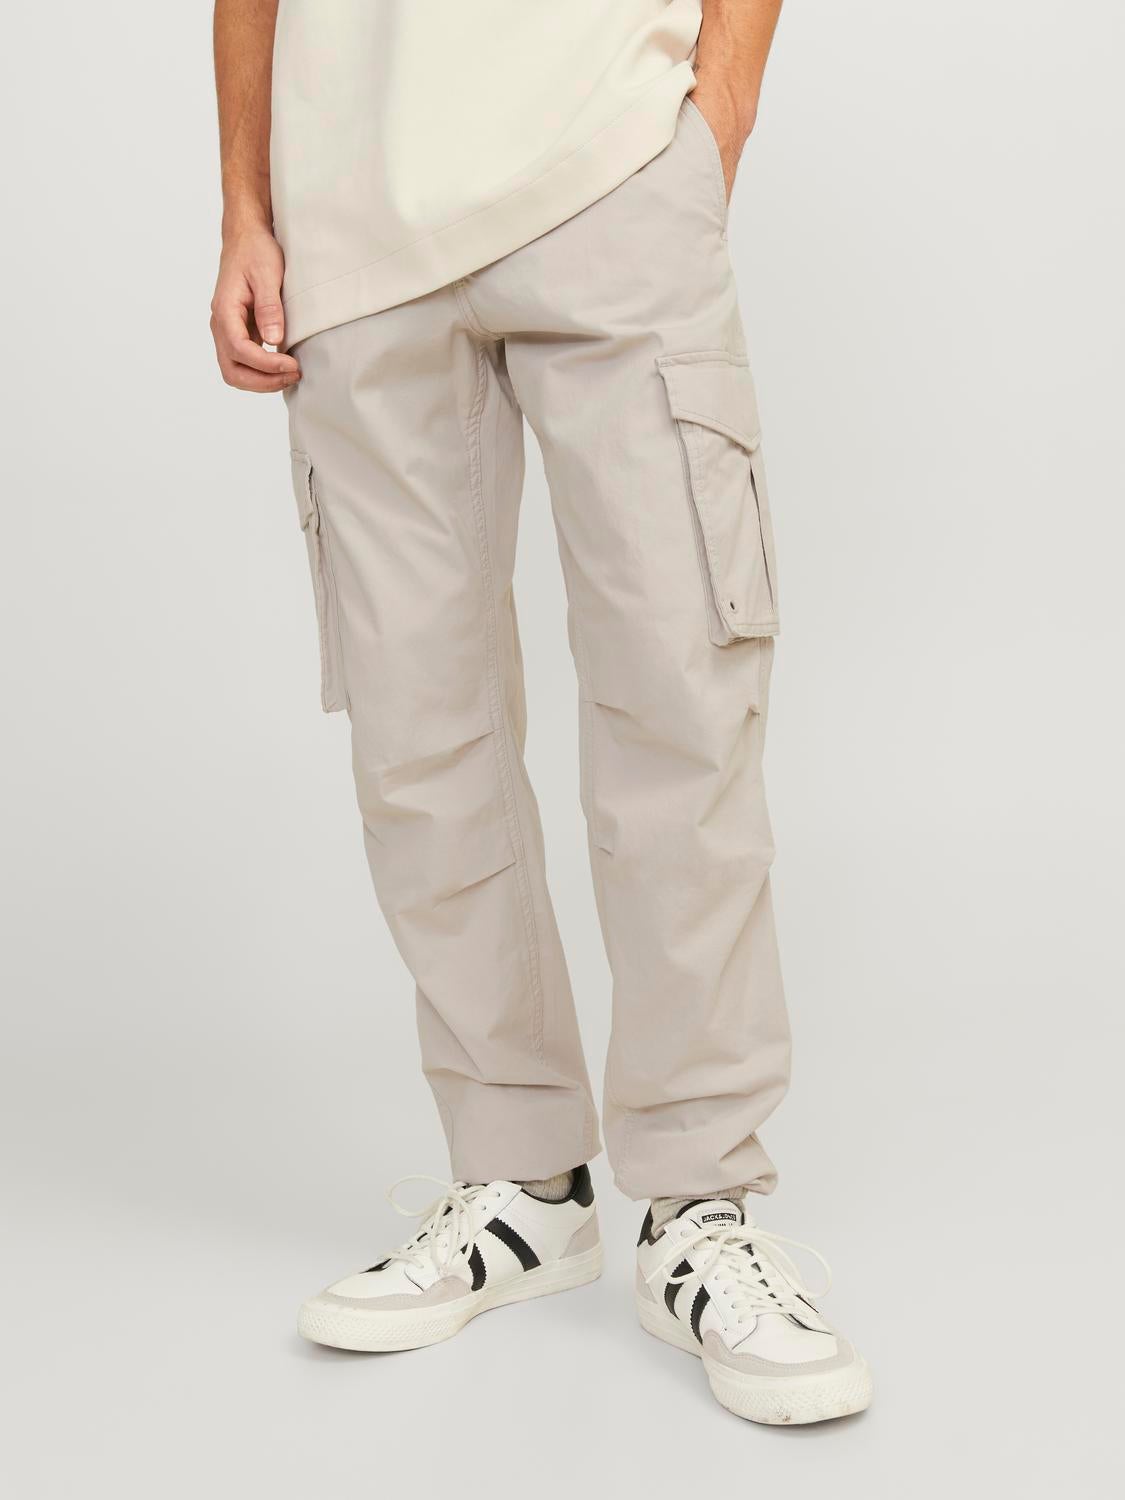 Topshop high waisted cargo pants with utility pockets in white | ASOS